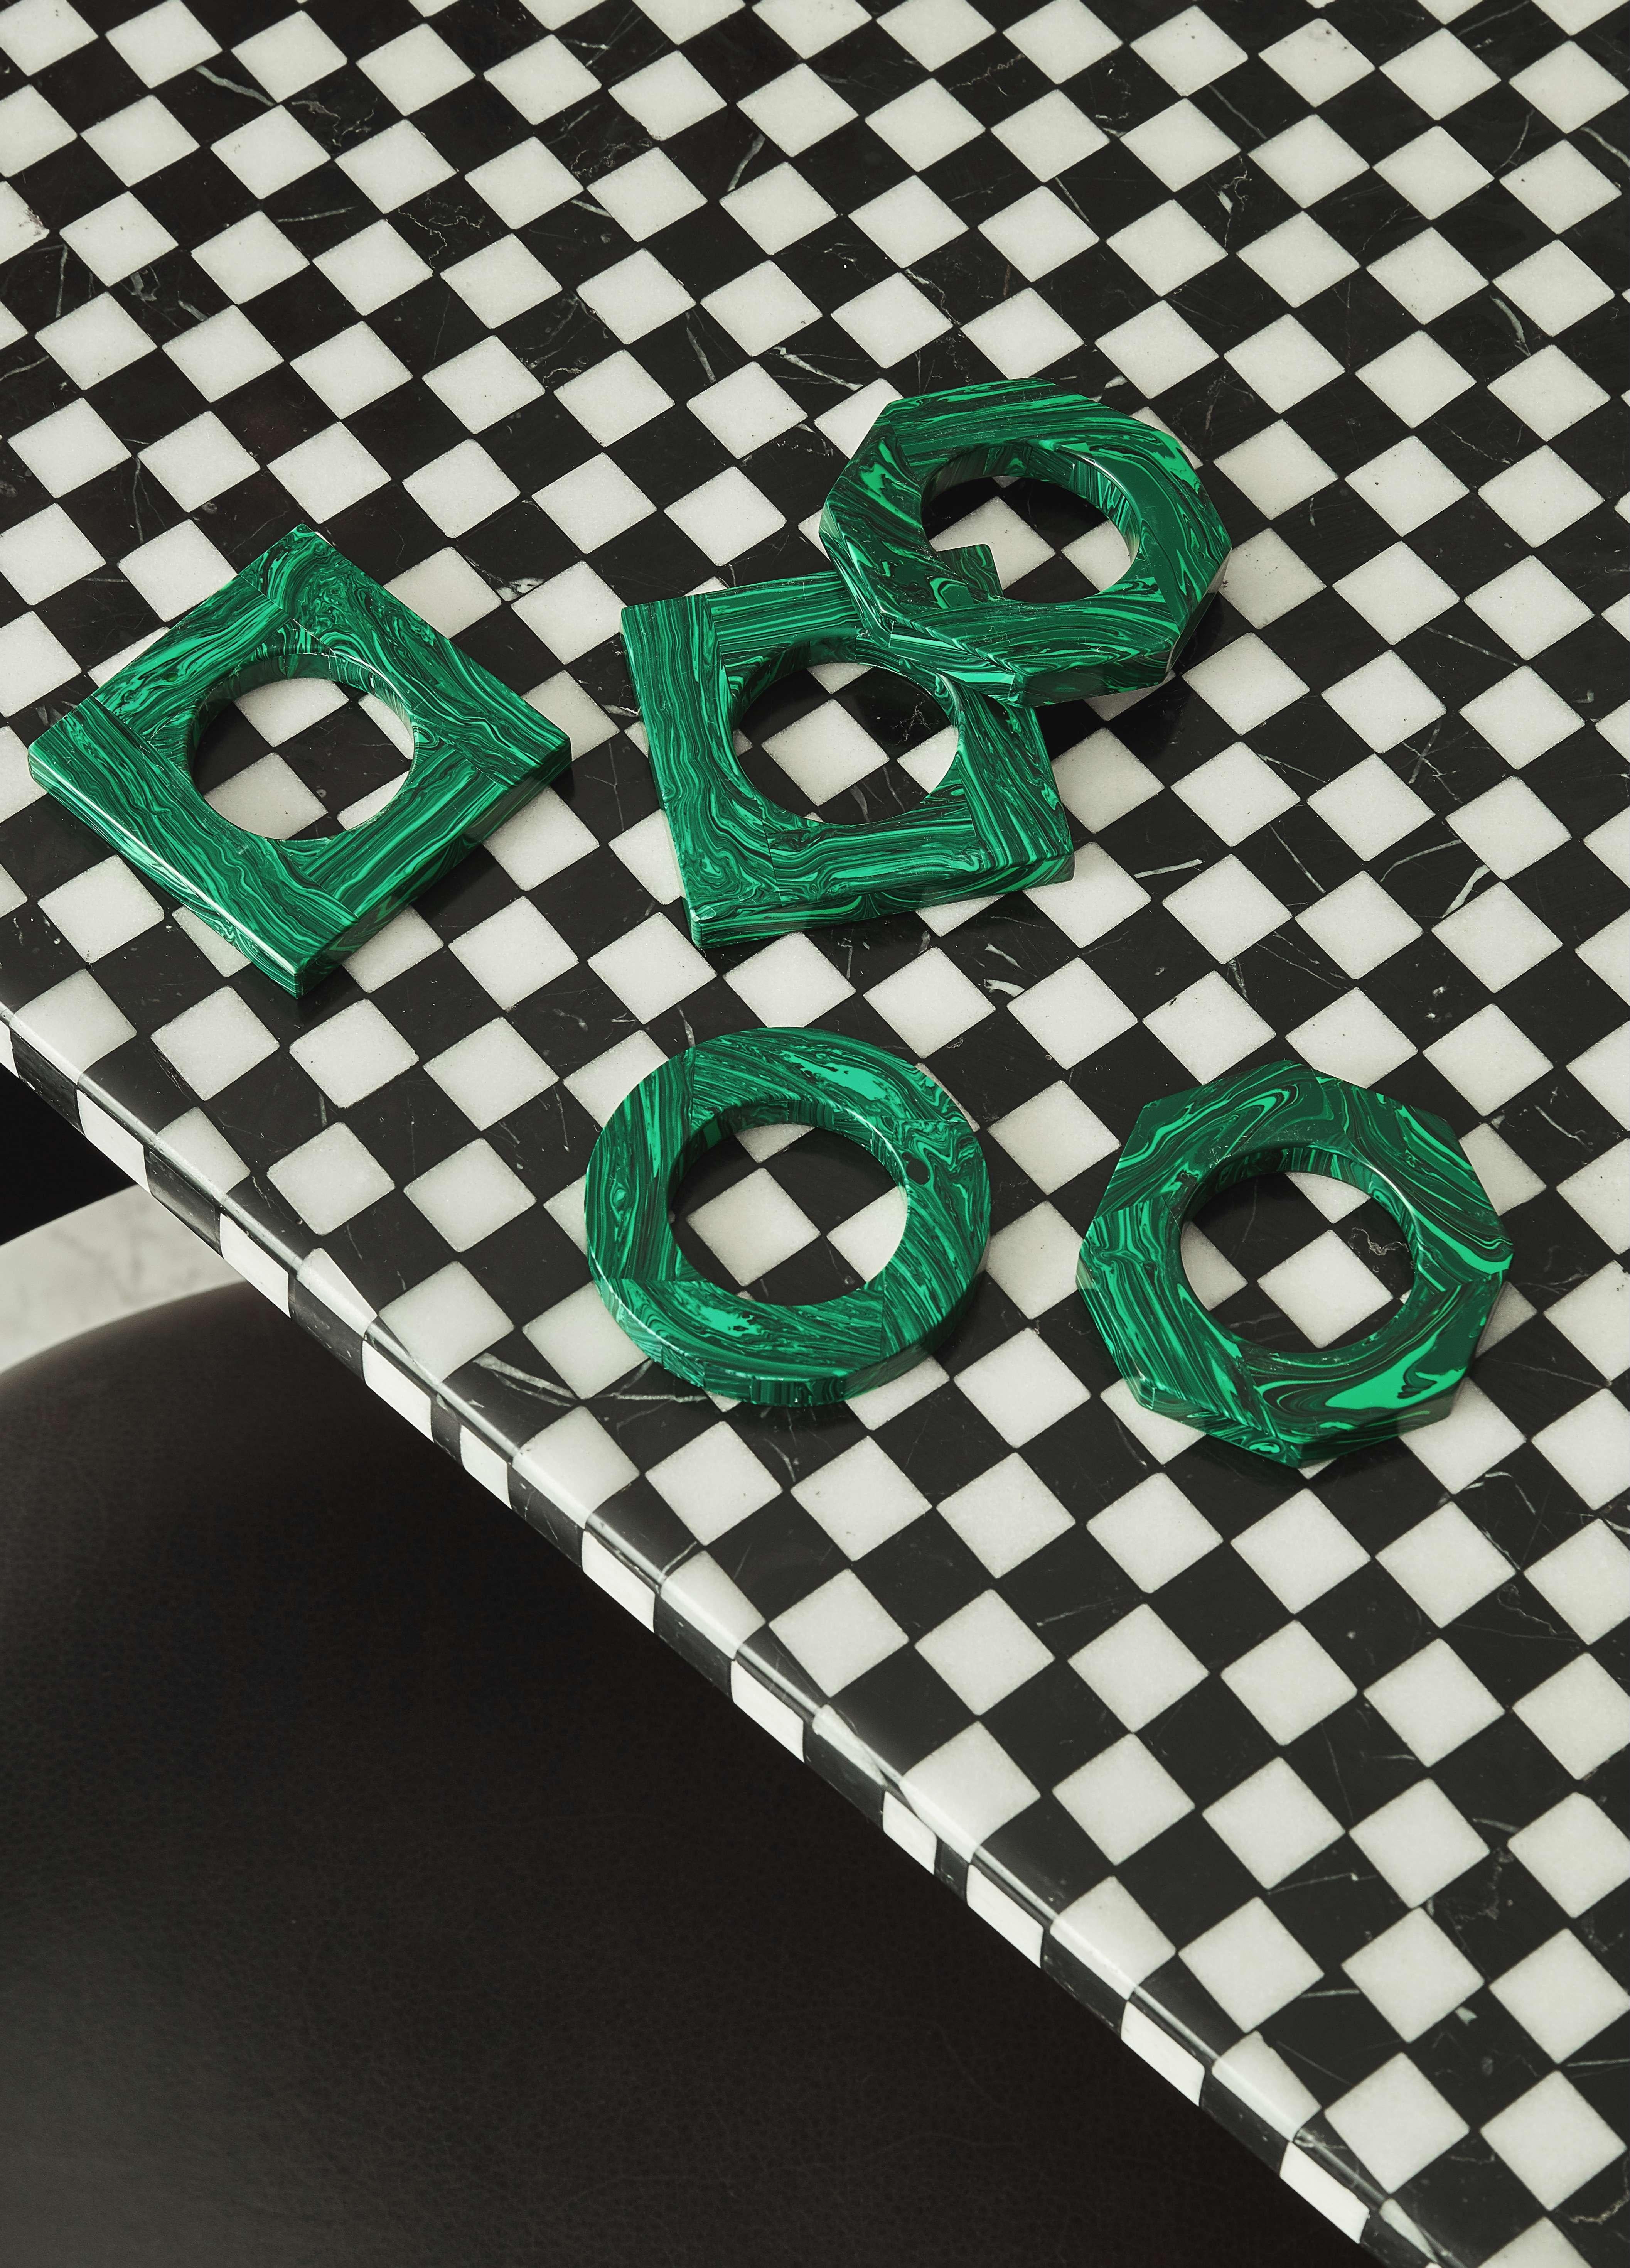 Our luxurious Malachite Napkin Rings are completely made with natural malachite. They are the perfect finishing touch for a beautiful table. Three different geometric shapes available: circular, square and octagonal. 

All of the pieces in this